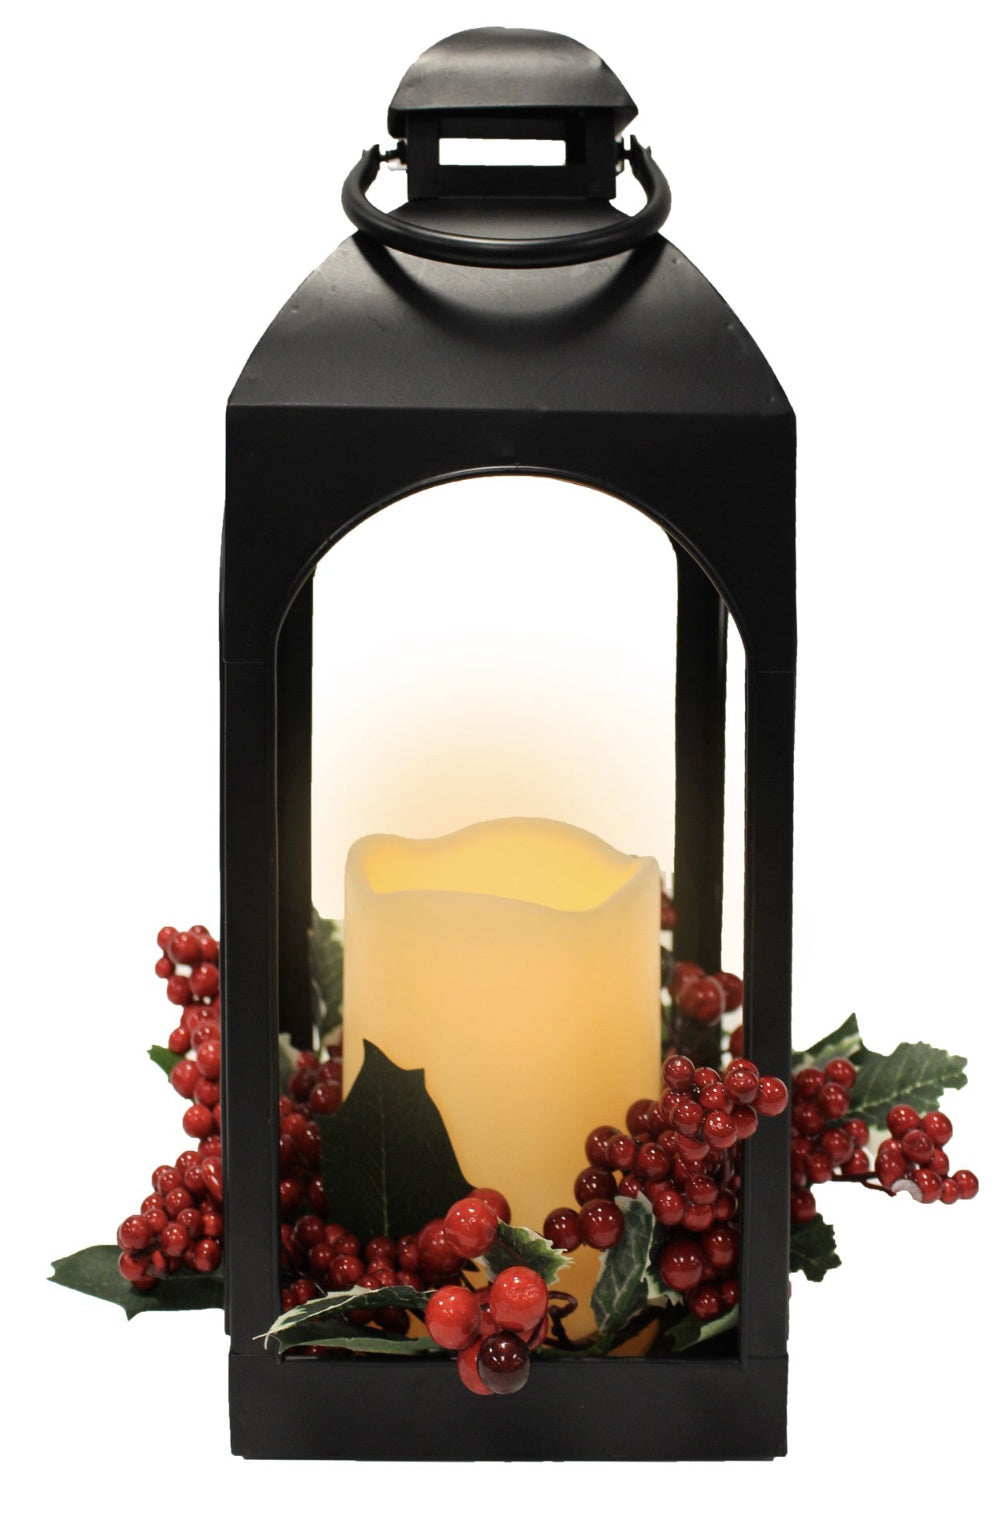 LED LANTERN WITH BERRIES